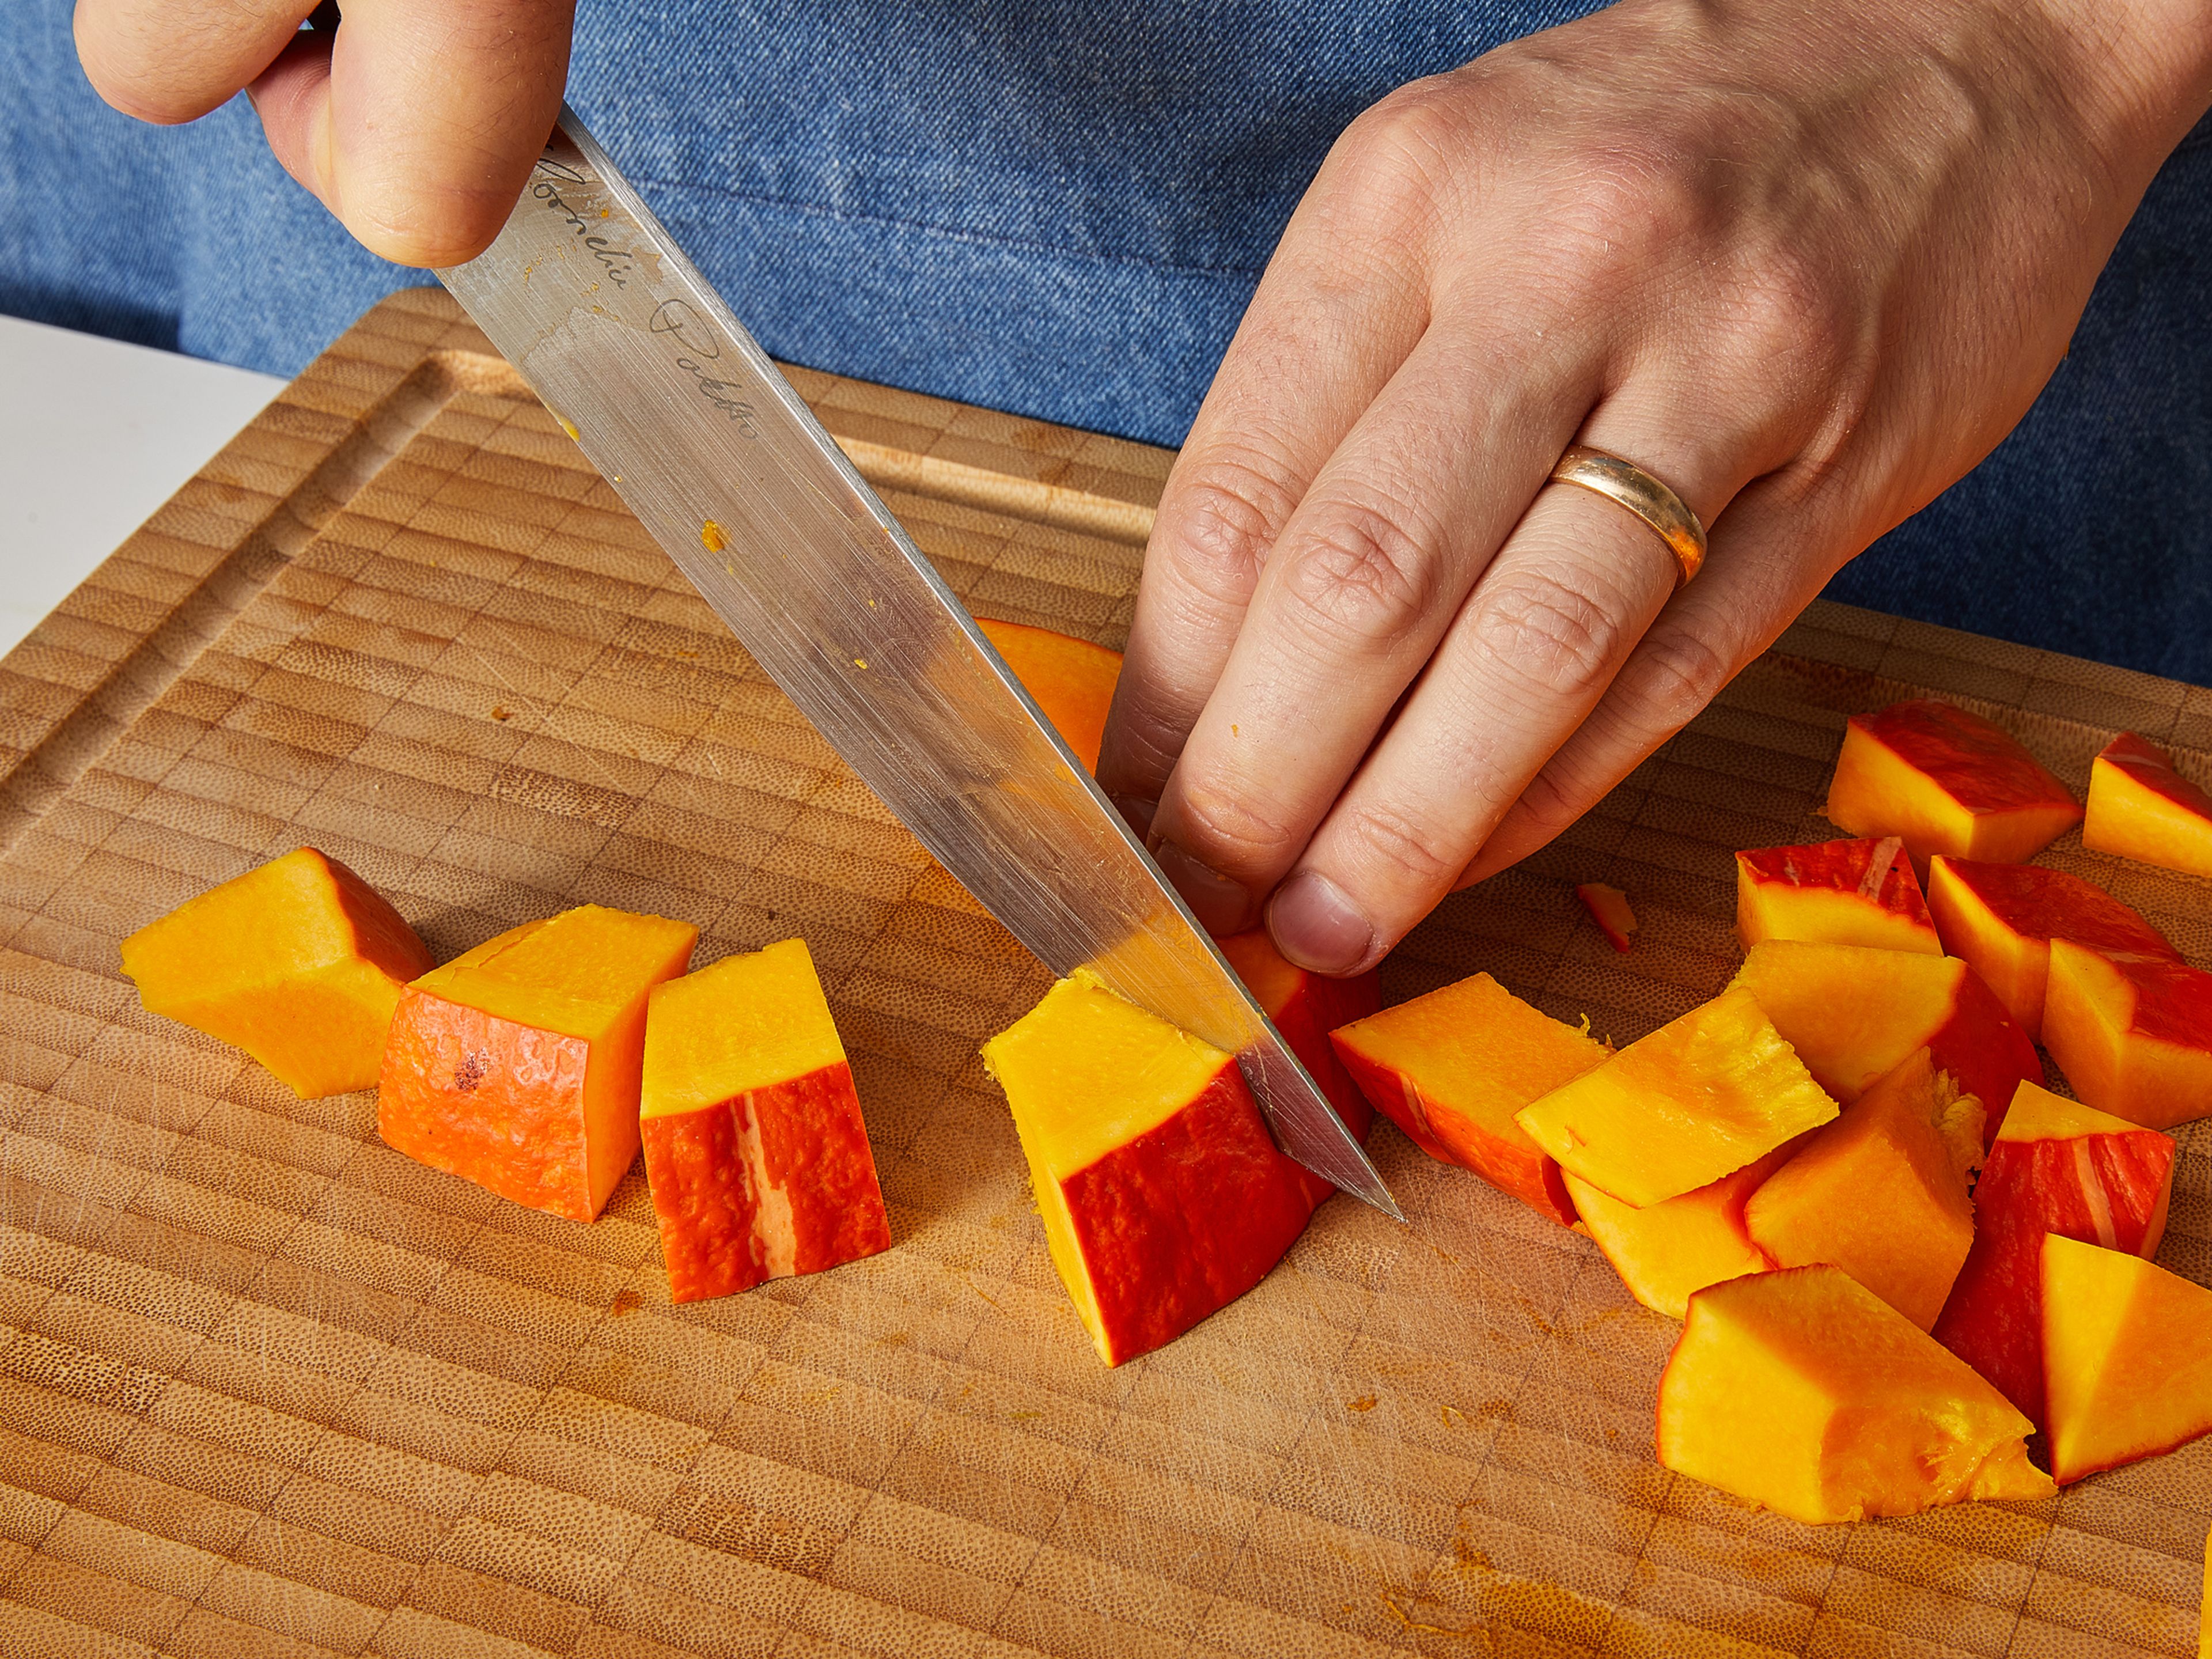 Preheat the oven to 200°C/390°F top/bottom heat. Cut pumpkin in half and scrape out the seeds with a spoon and discard (or wash and save for another use). Cut pumpkin into approx. 3 cm/ 1.2 in. cubes. Peel onions and cut into approx. 1 cm/ 0.4 in. wedges. Cut halloumi into approx. 2 cm/ 0.8 in., bite-sized cubes and pat dry.